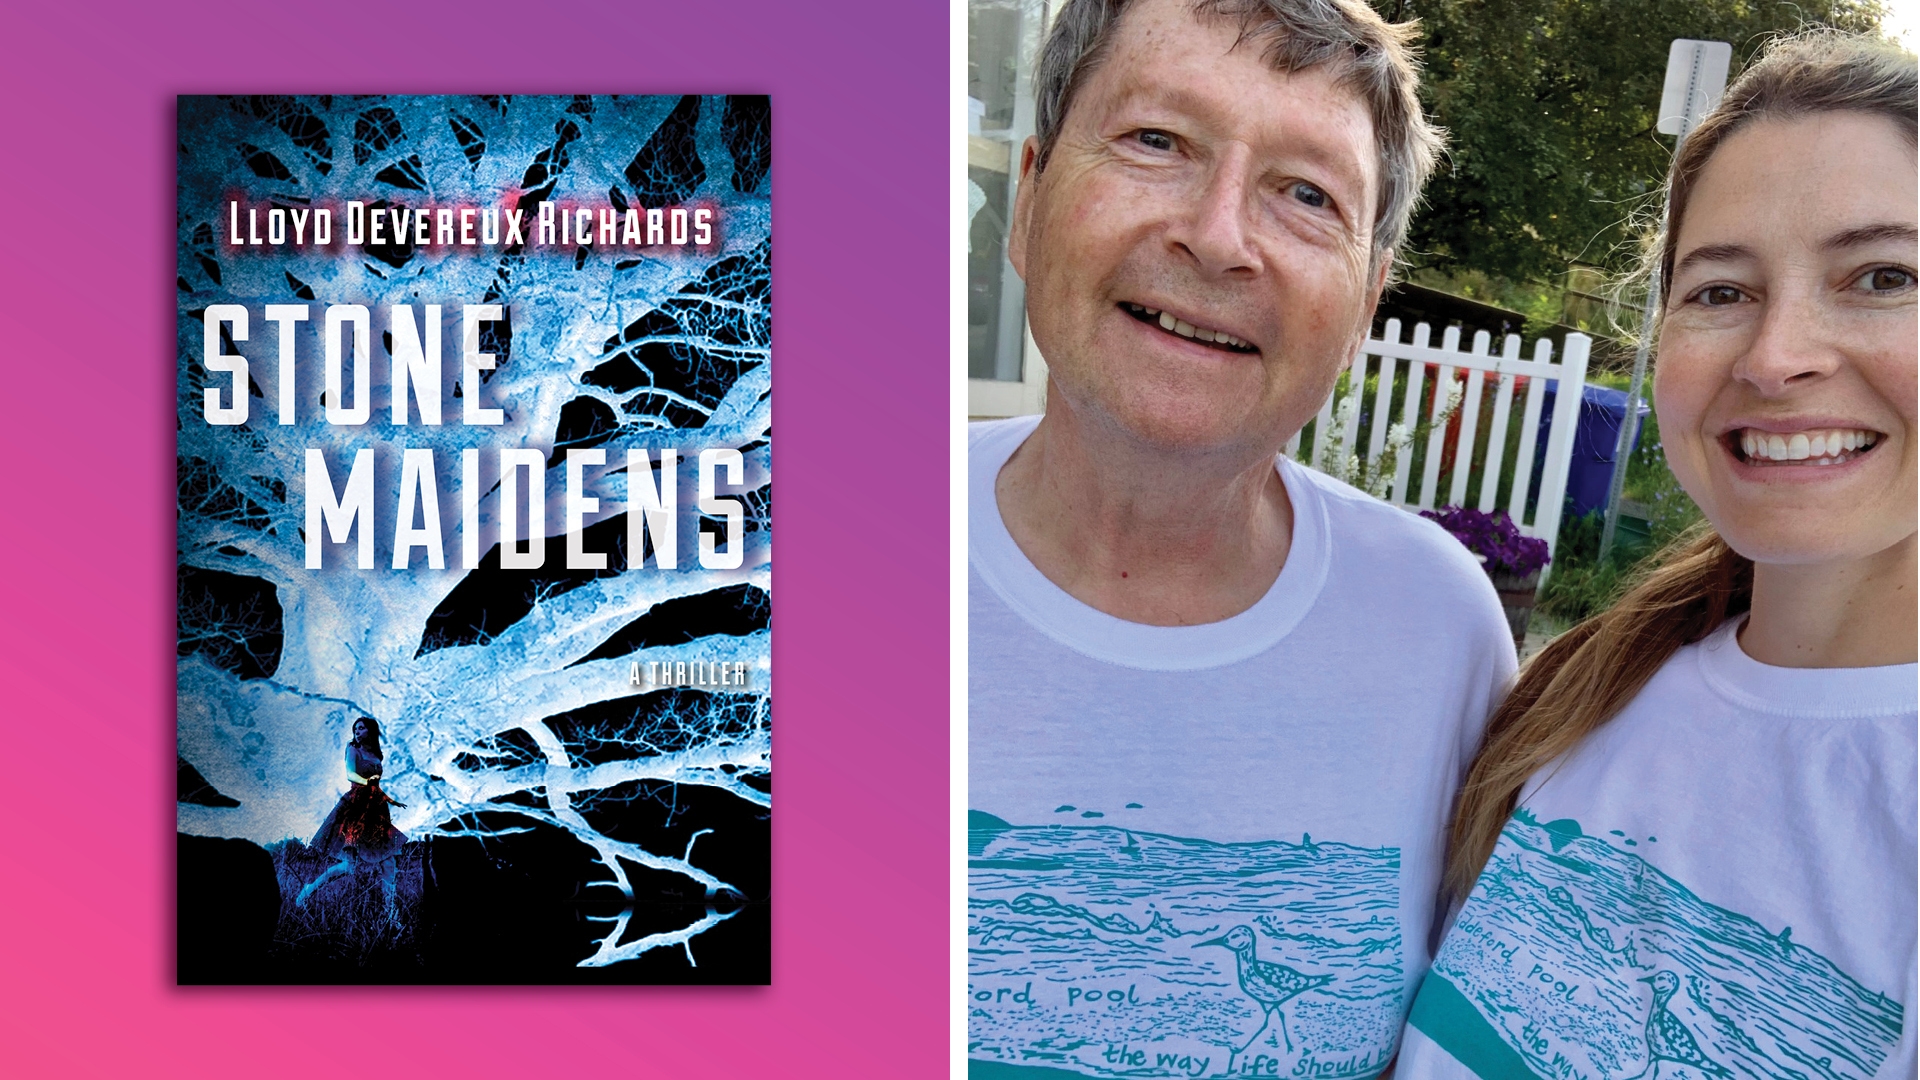 An image of the book cover, 'Stone Maidens' and the author, Lloyd Deverux Richards and his daughter